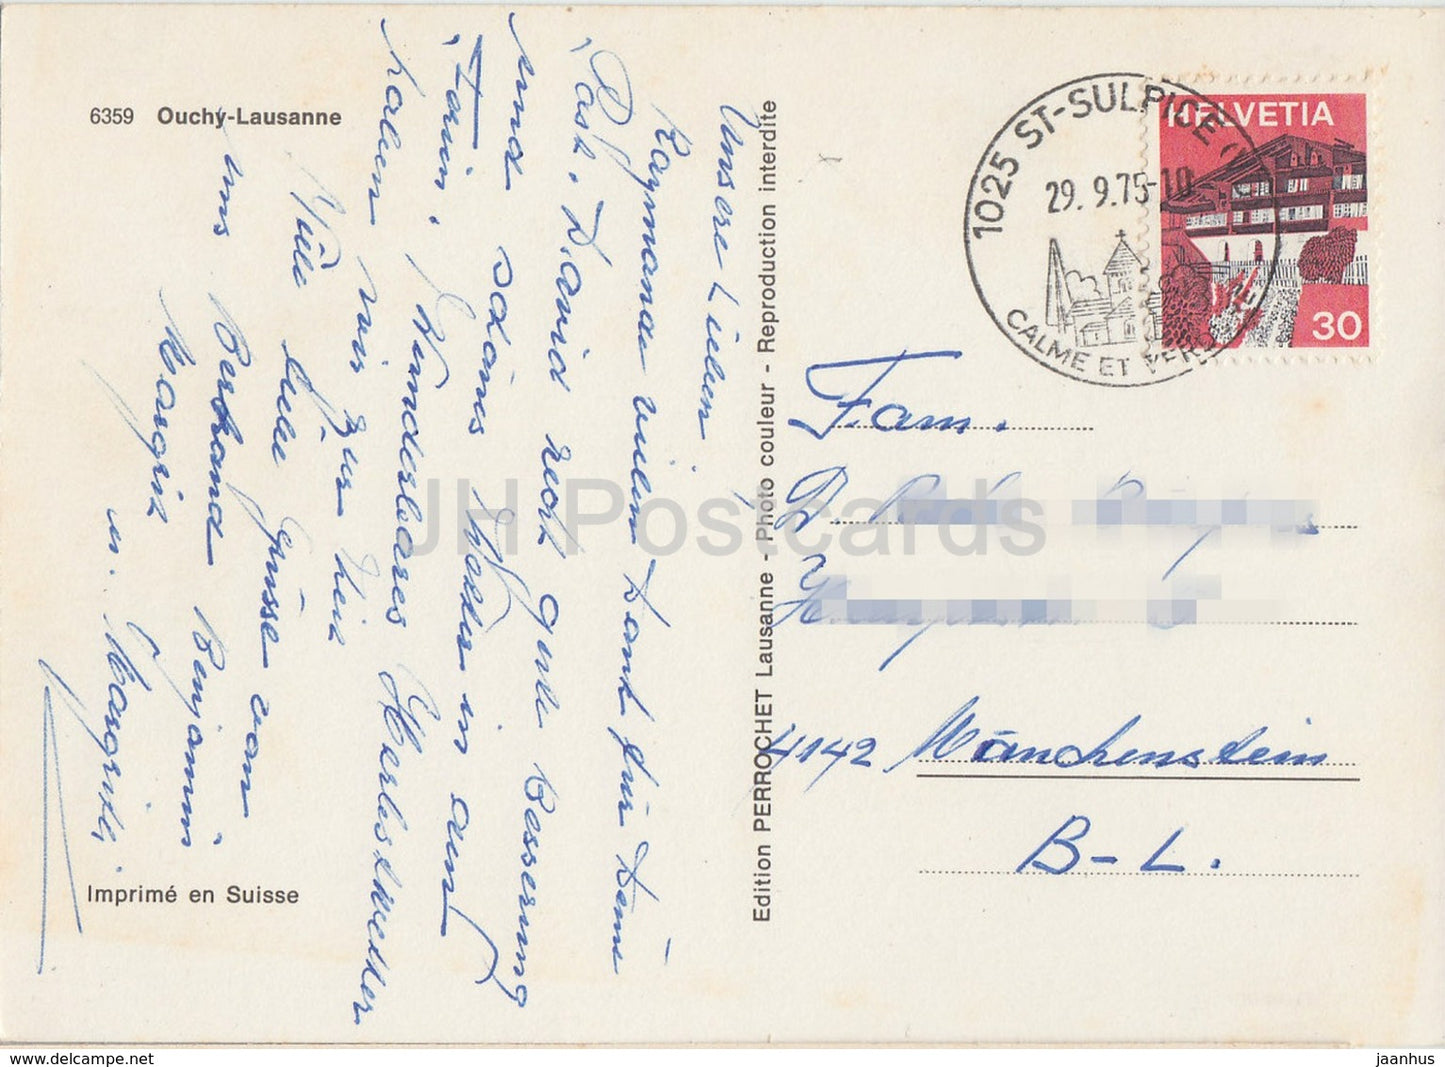 Ouchy Lausanne - boat - 6359 - 1975 - Switzerland - used